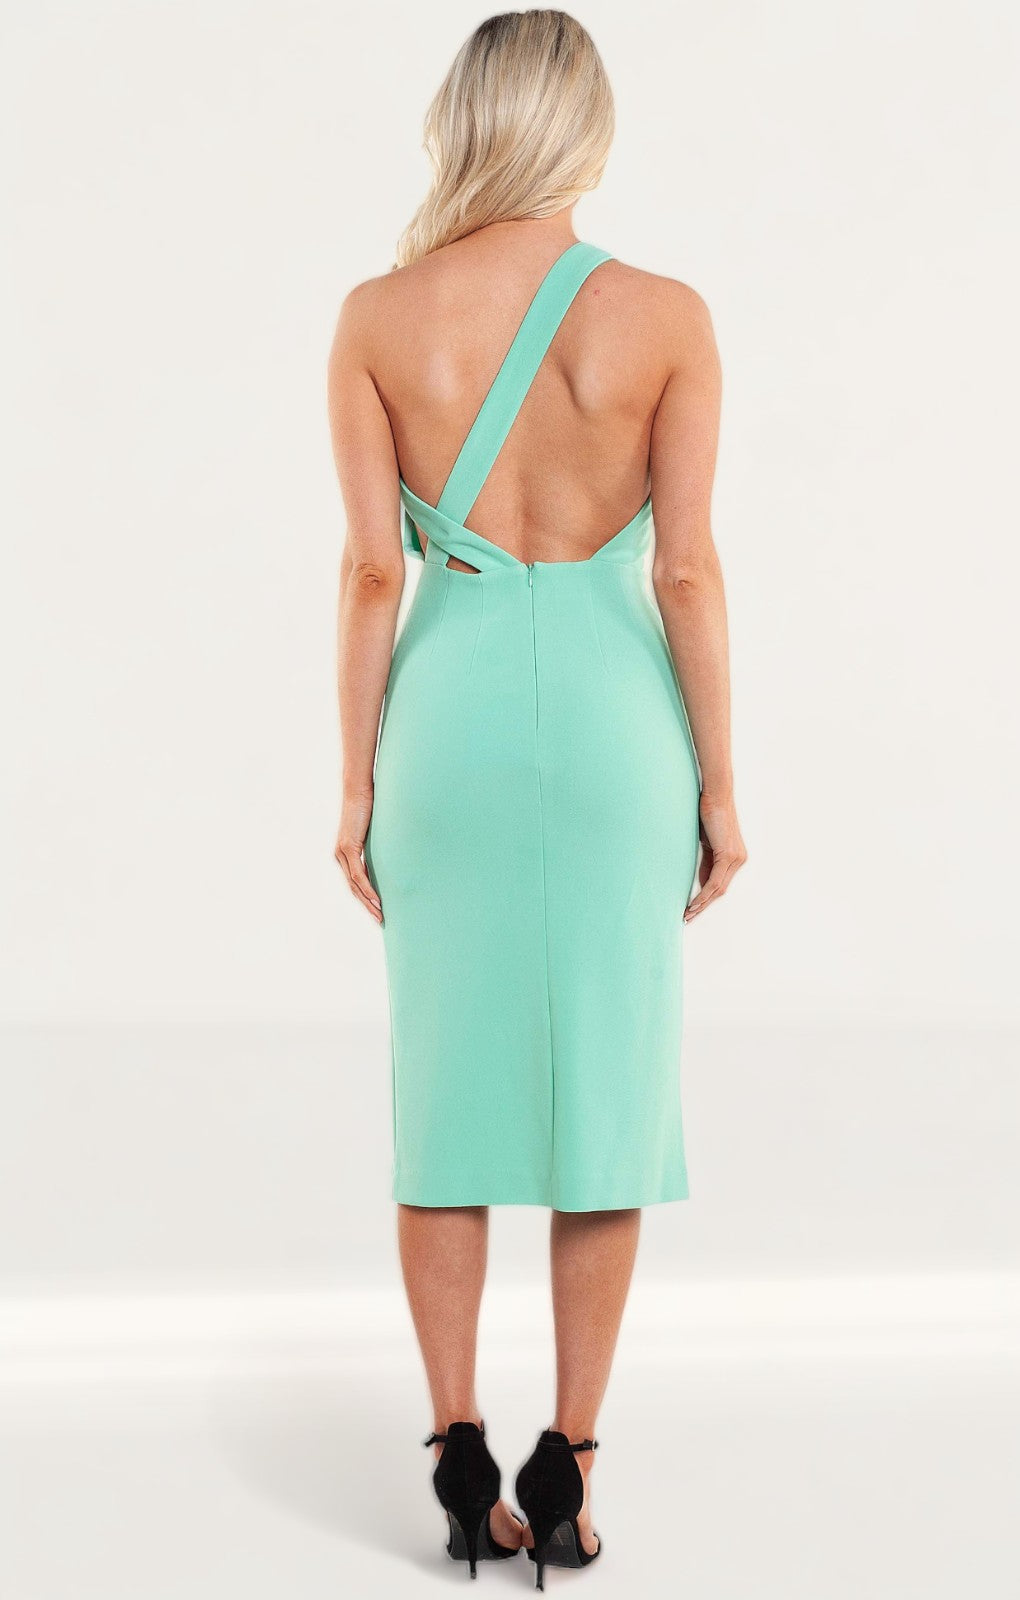 Finders Keepers Daniella Dress product image